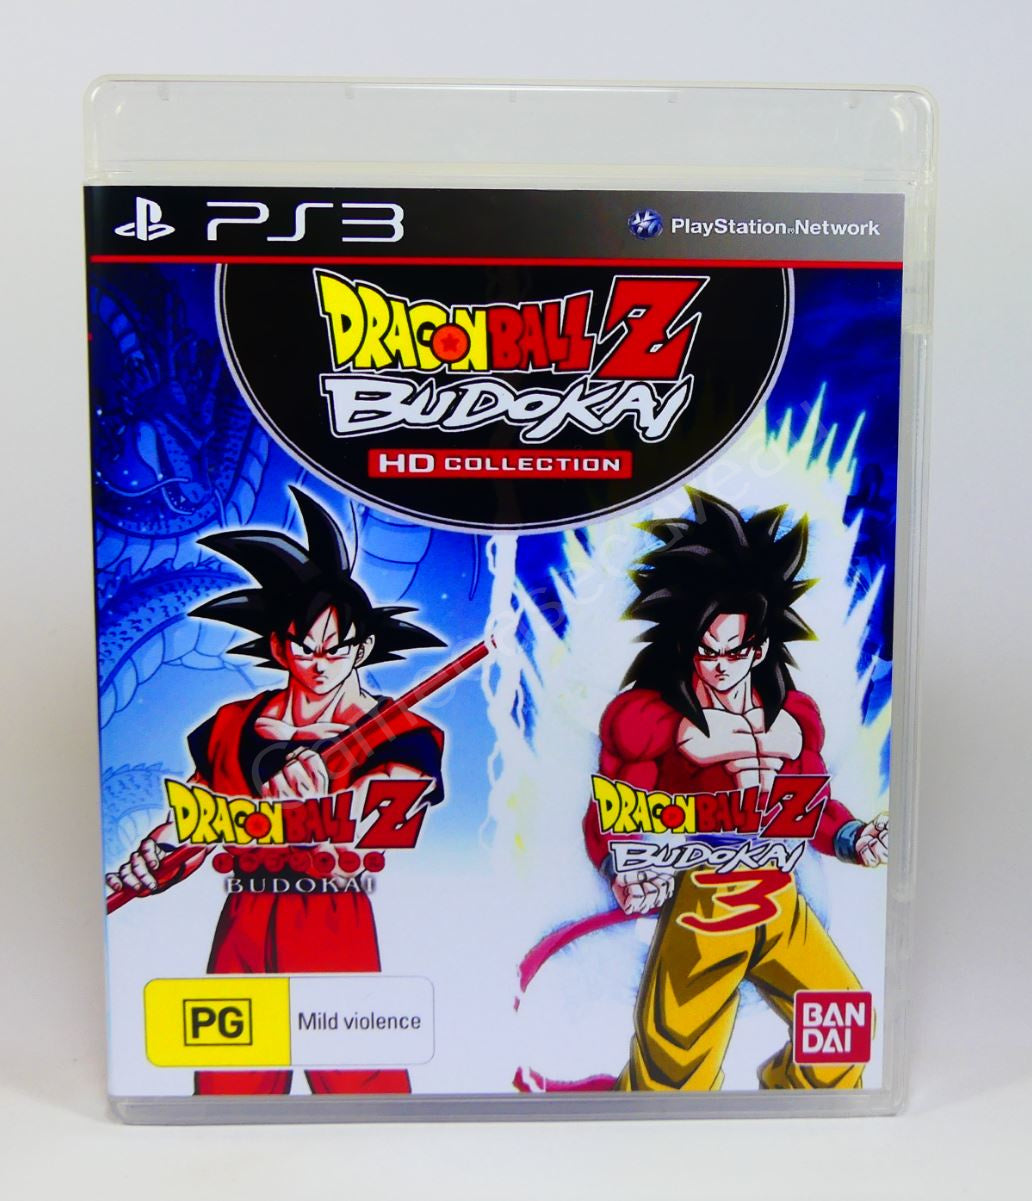 Dragon Ball Z Budoken HD Collection - PS3 Replacement Case